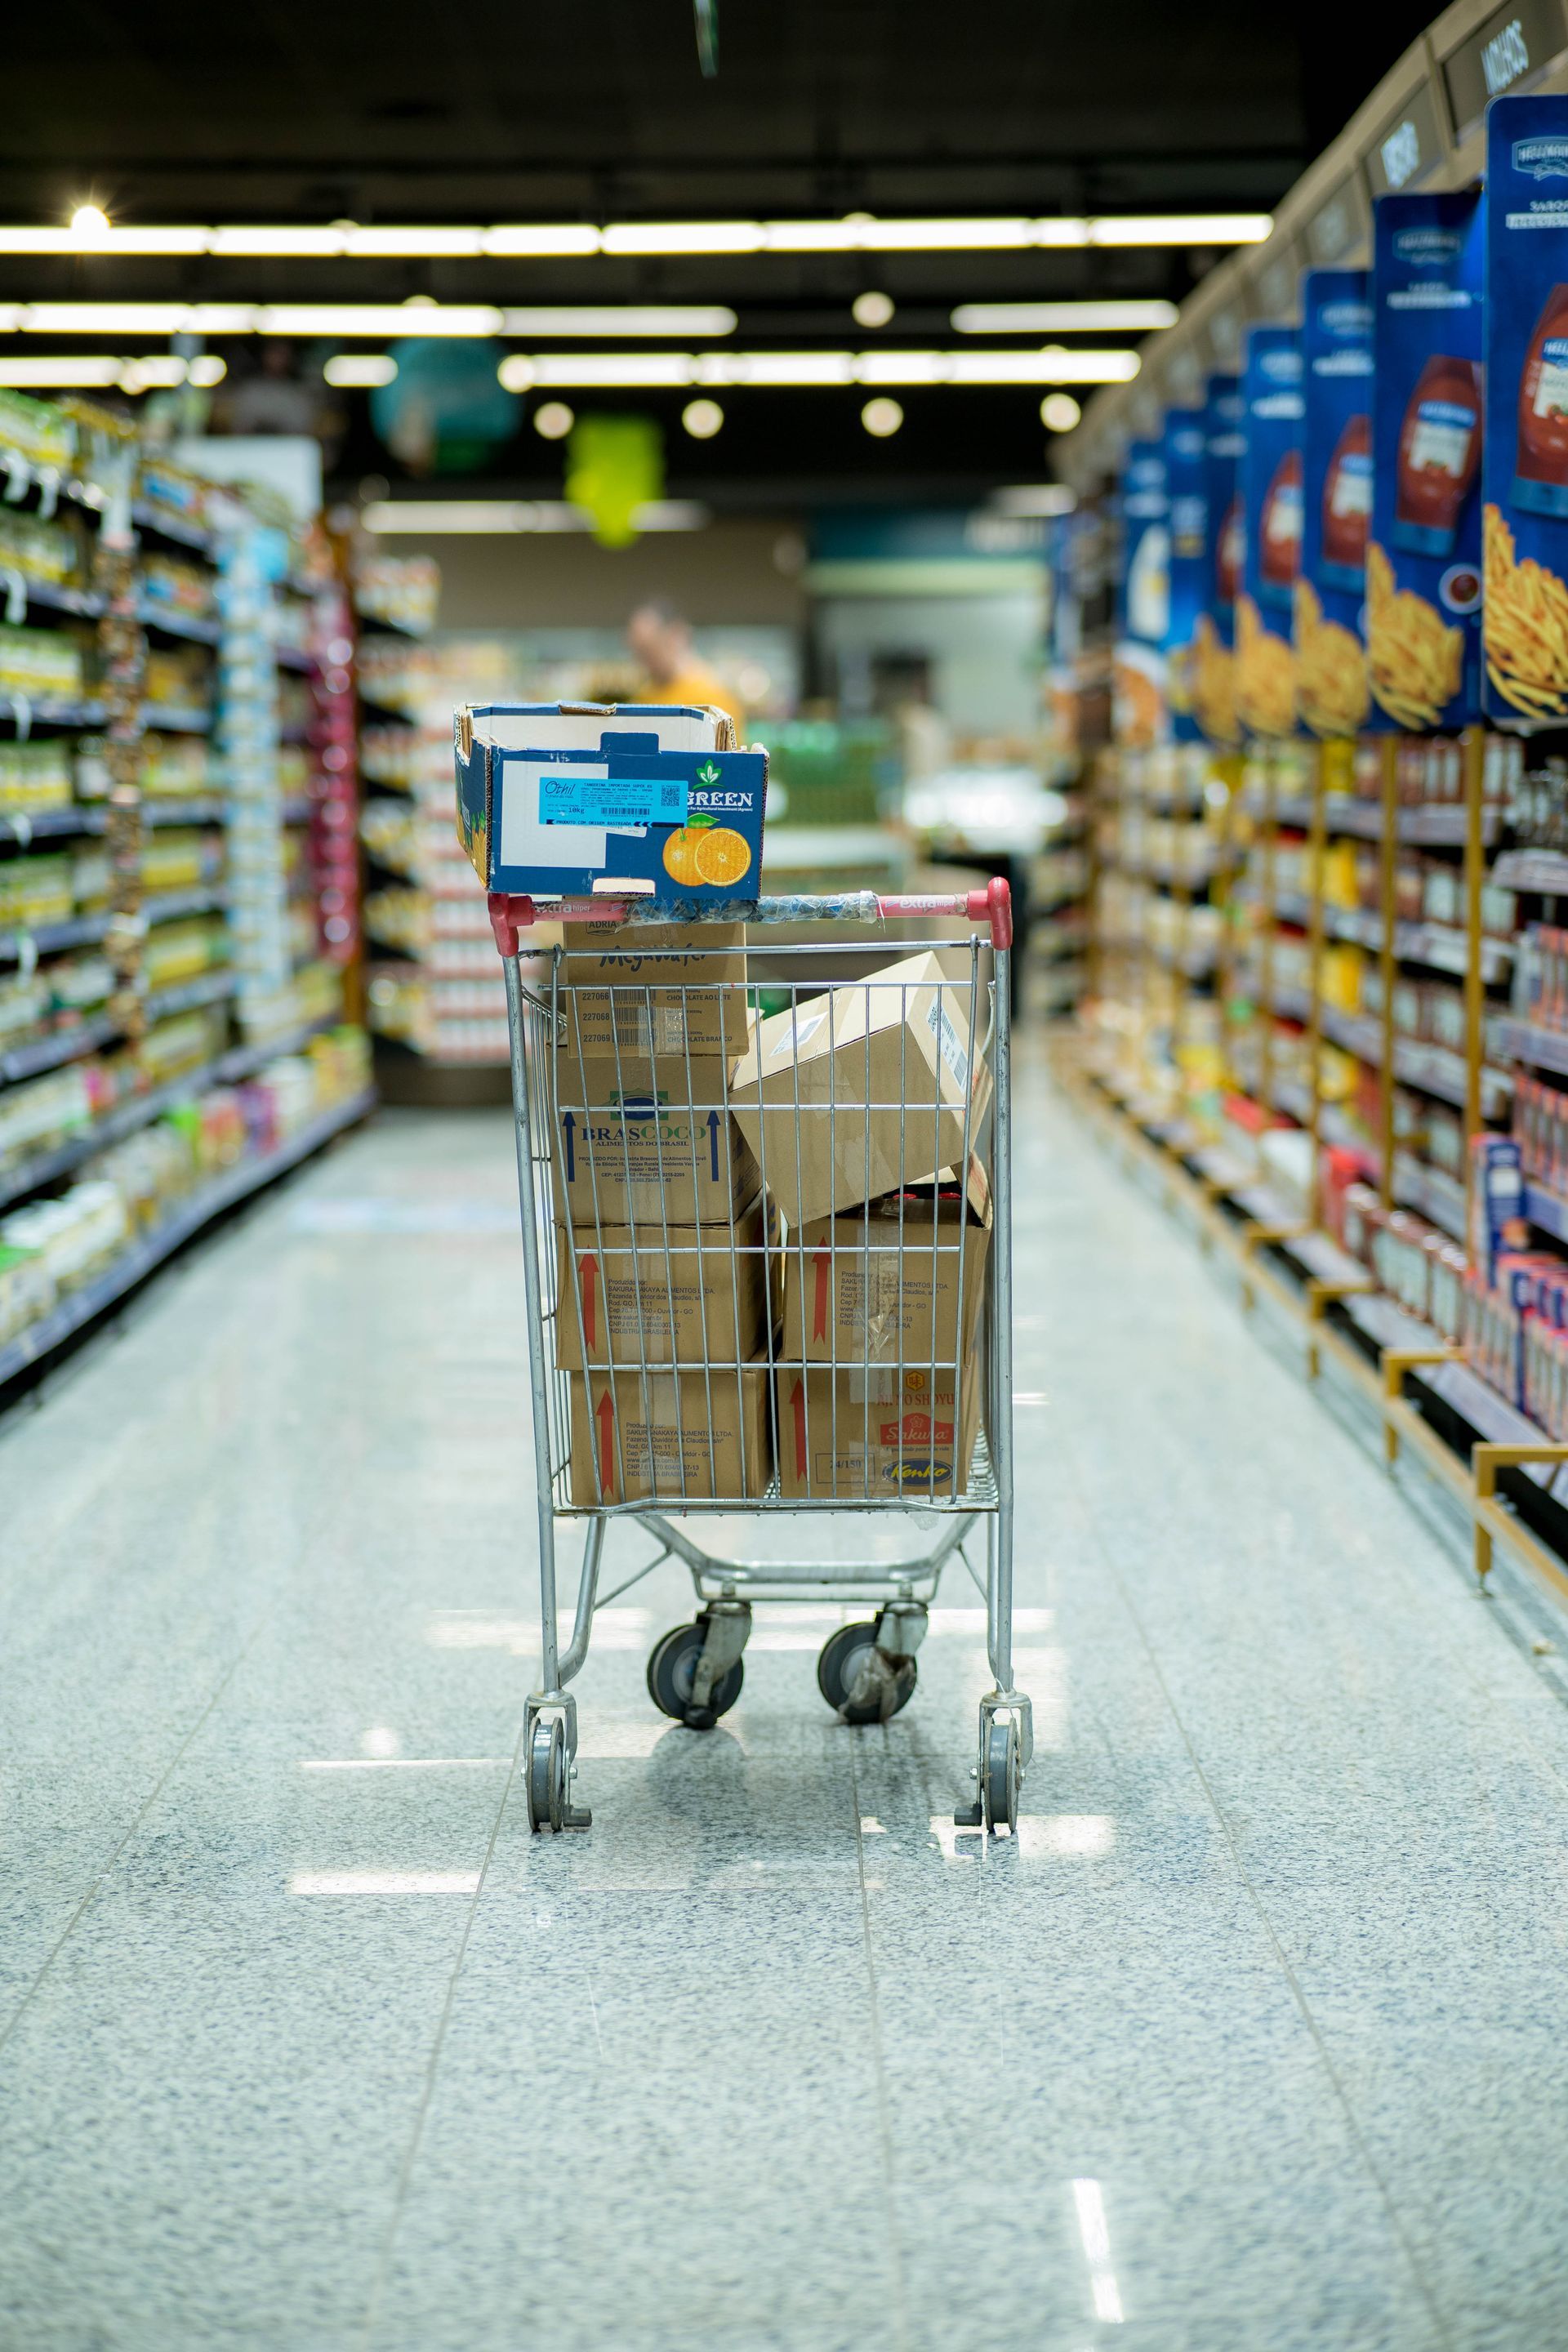 A shopping cart is filled with boxes in a supermarket aisle.